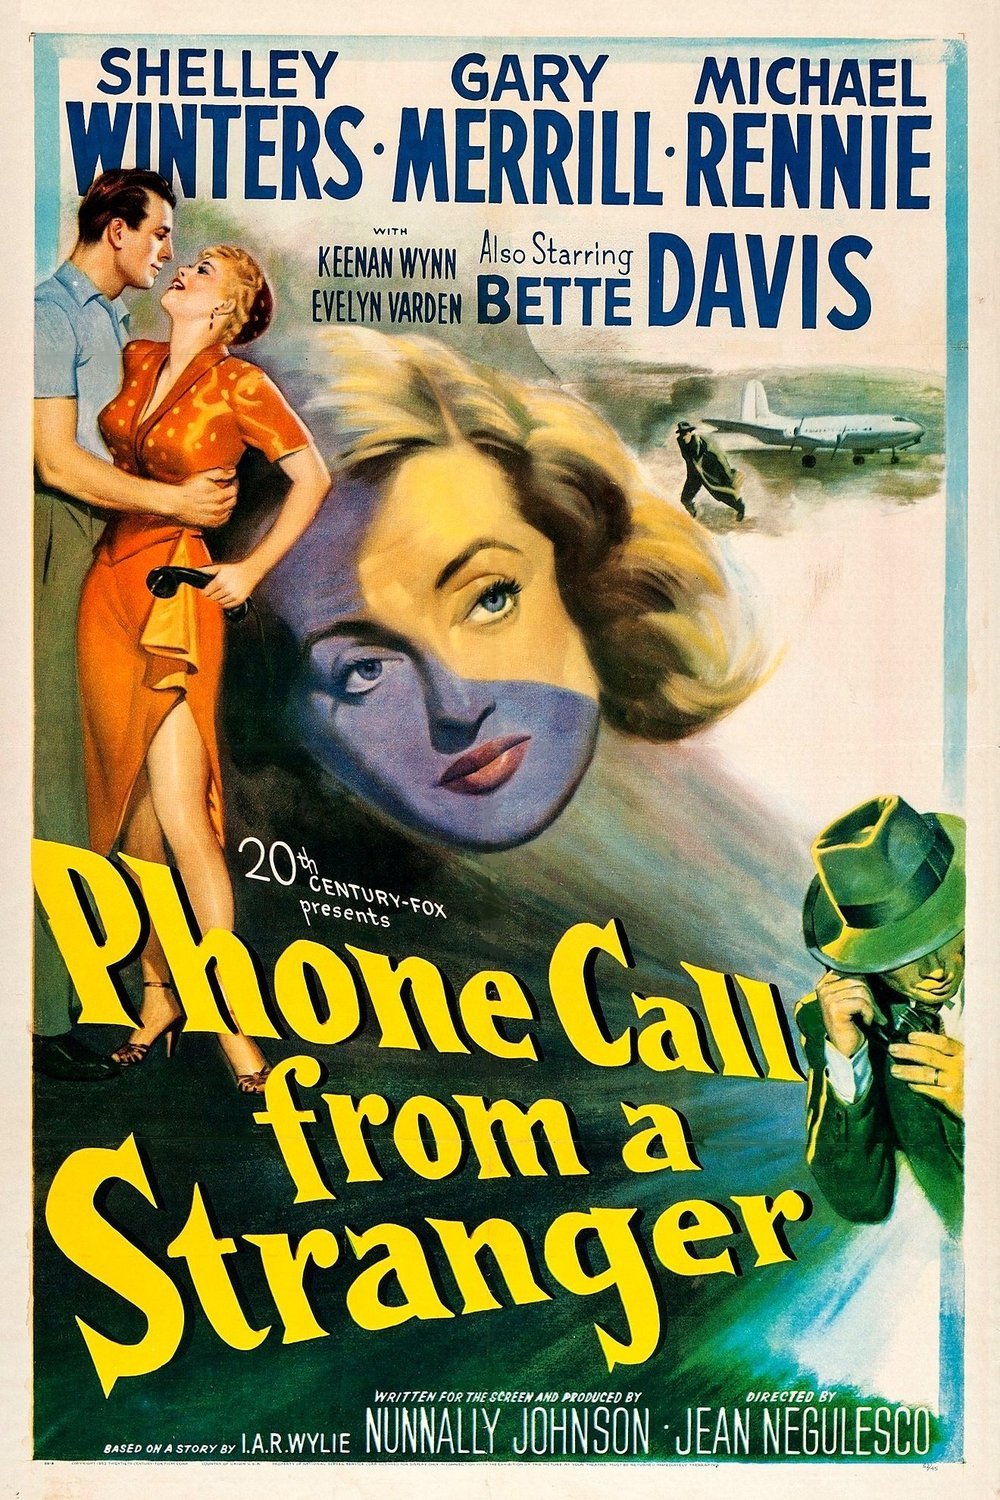 Poster of the movie Phone Call from a Stranger